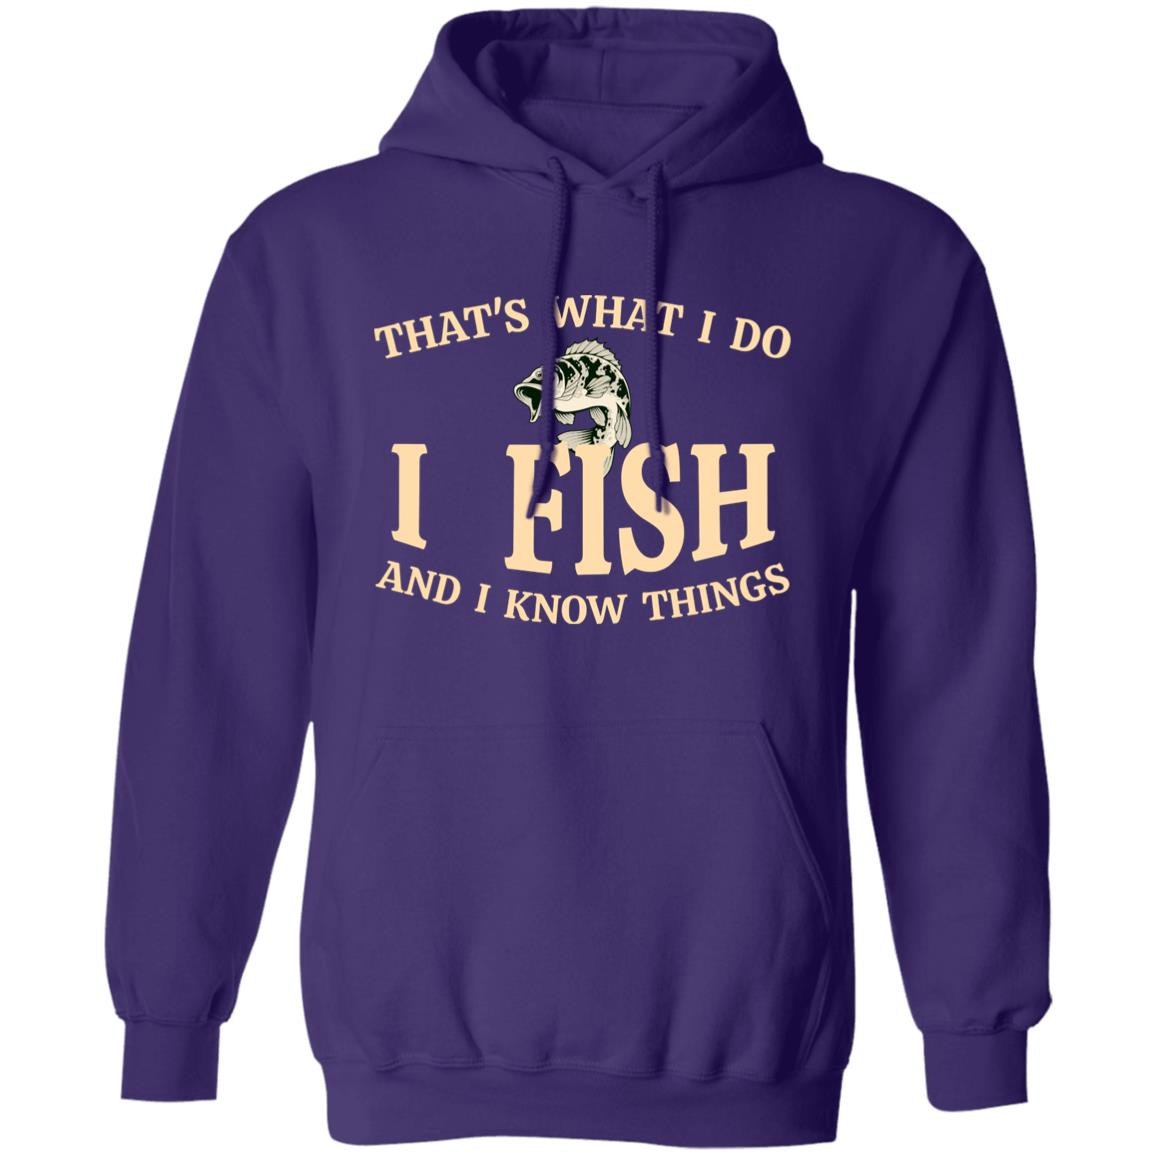 That's what I do I fish and I know things hoodie purple